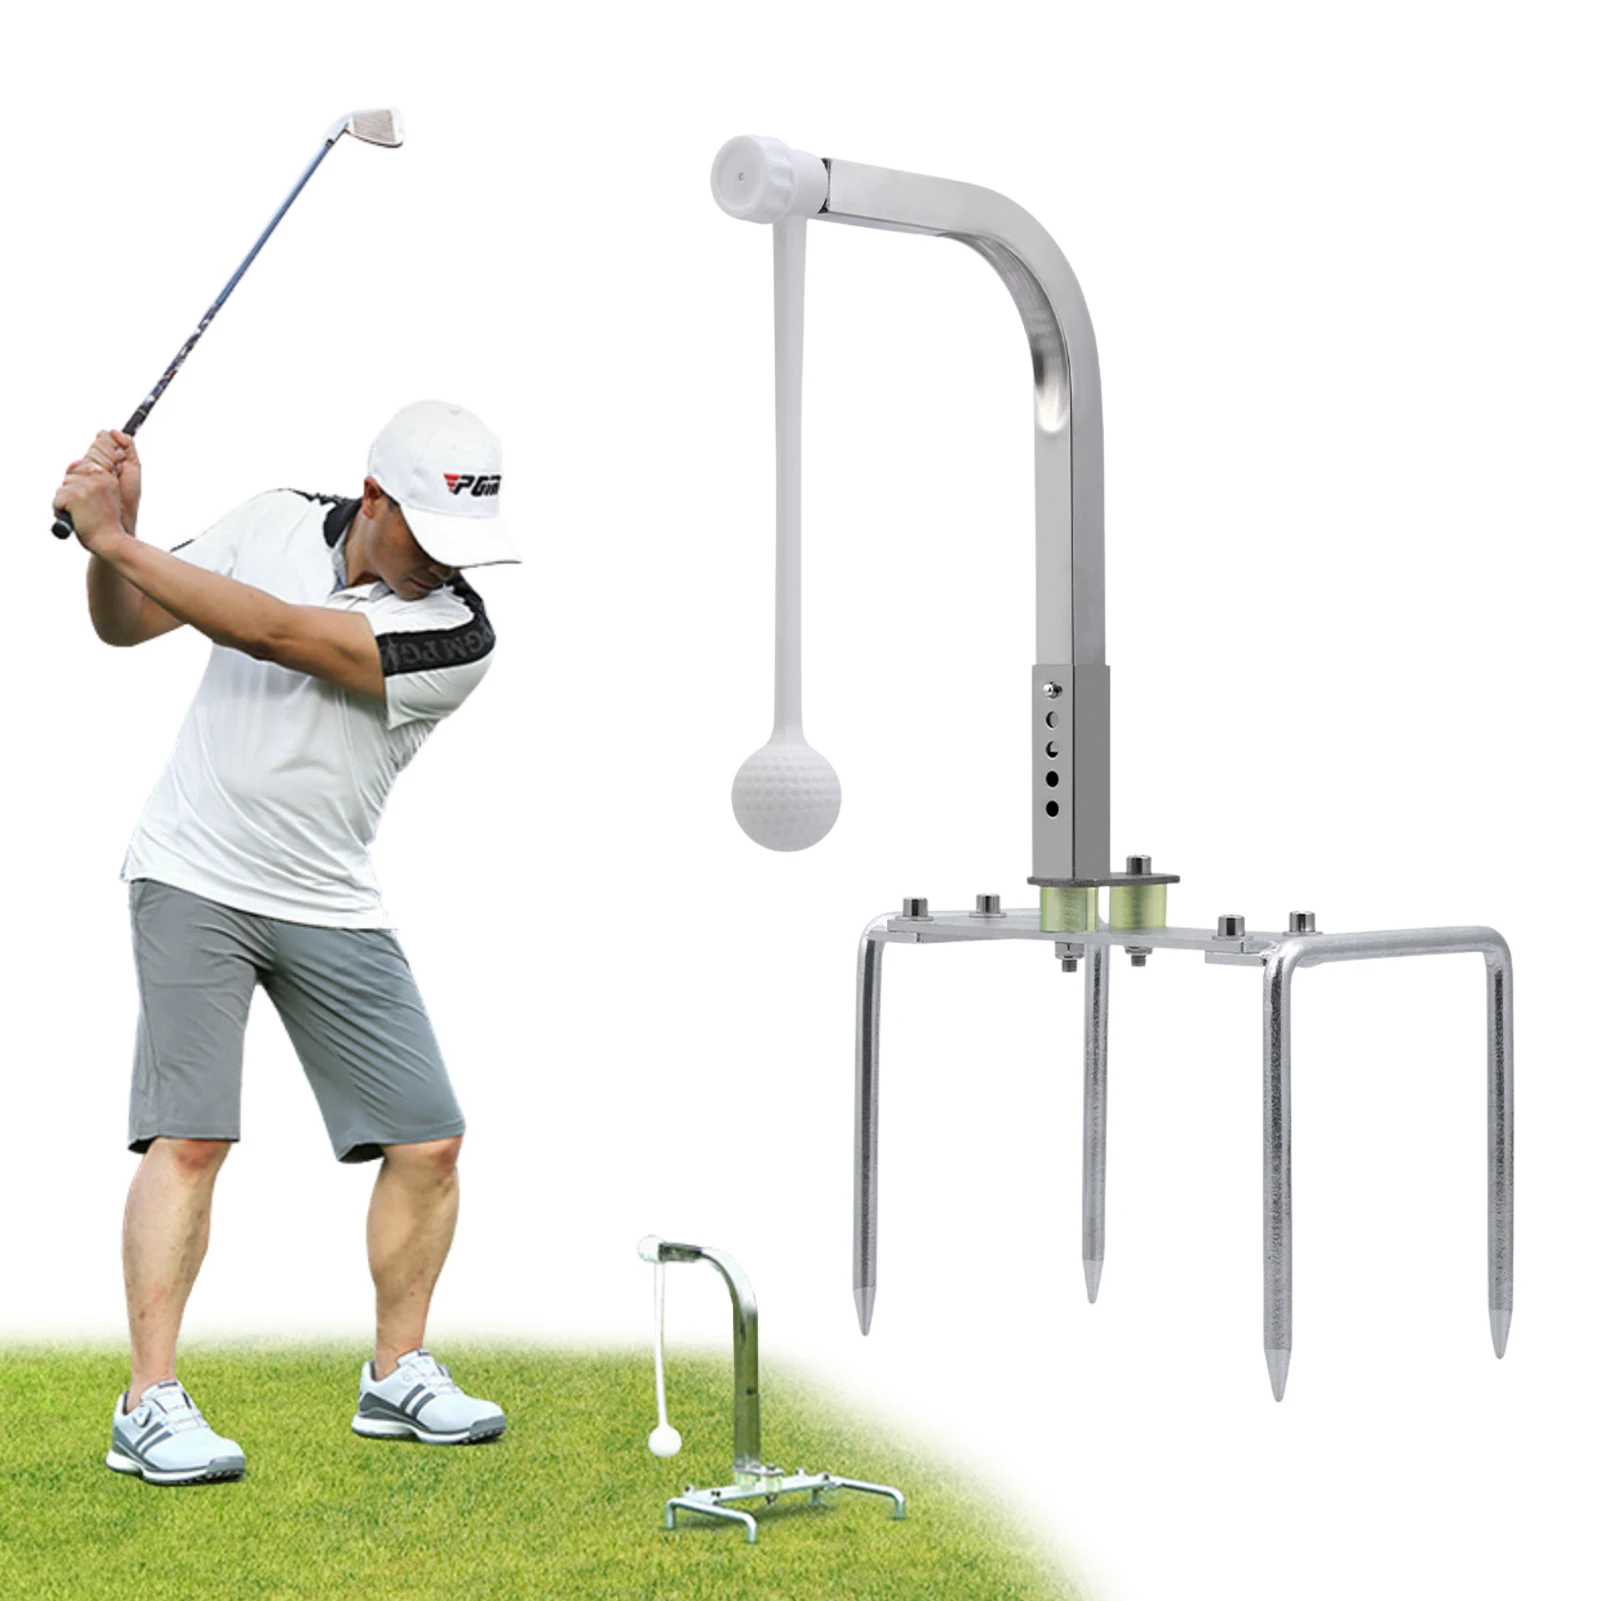 Golf Swing Trainer Aid Golf Practice Equipment For Ball Hitting Outdoor Golf Swing Groover Training Aid With Adjustable Height